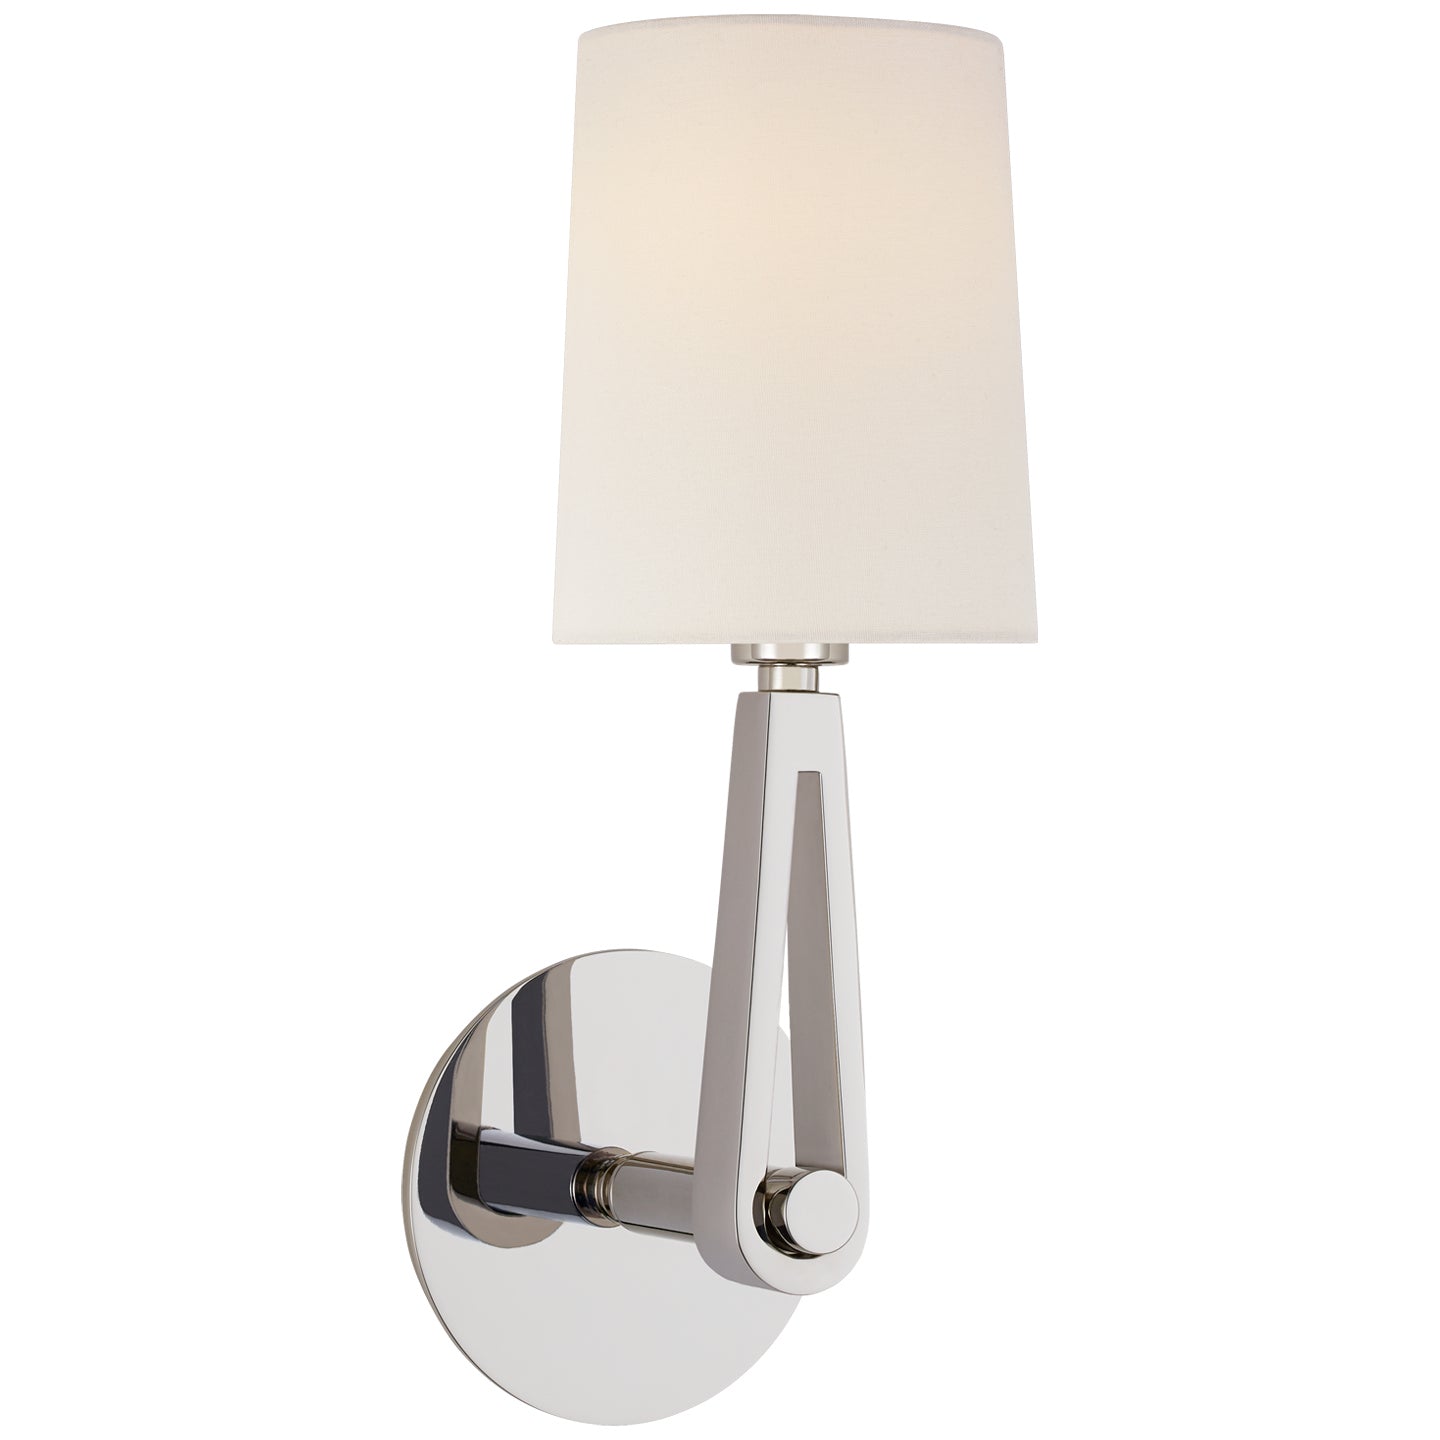 Load image into Gallery viewer, Visual Comfort Signature - TOB 2510PN-L - One Light Wall Sconce - Alpha - Polished Nickel
